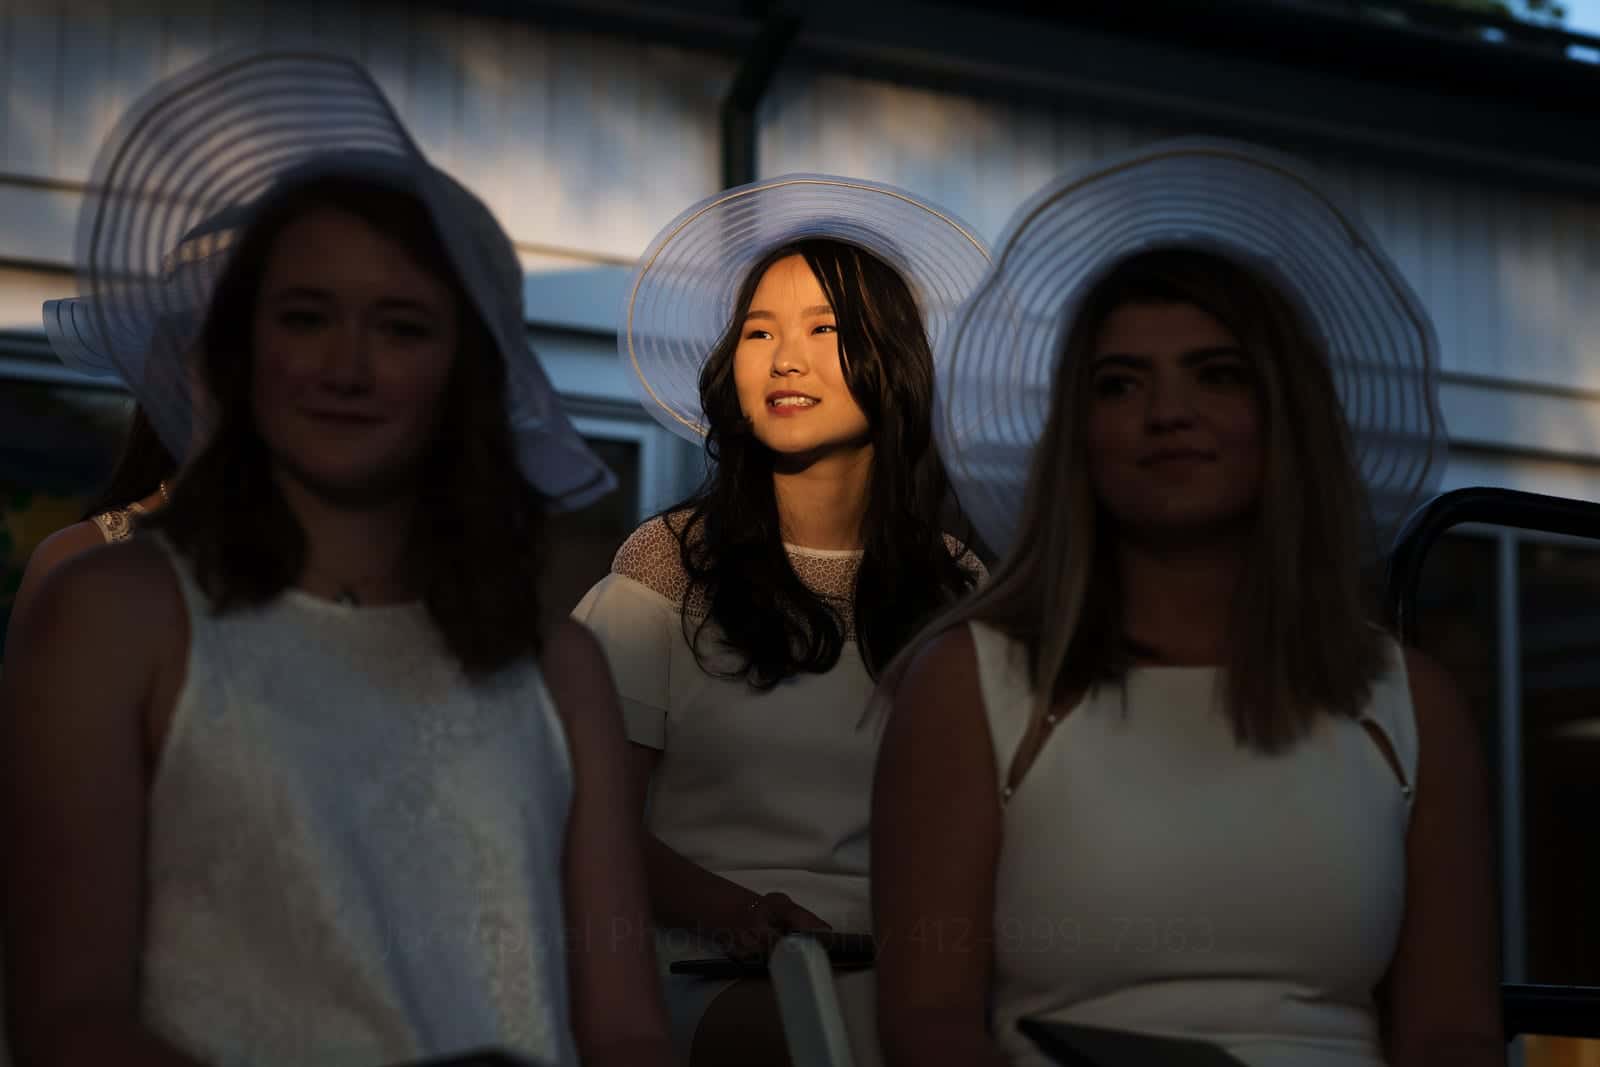 A girl wearing a white hat and dress is illuminated by a shaft of sunlight as the girls seated next to her are in shadow Pittsburgh editorial event photographer.